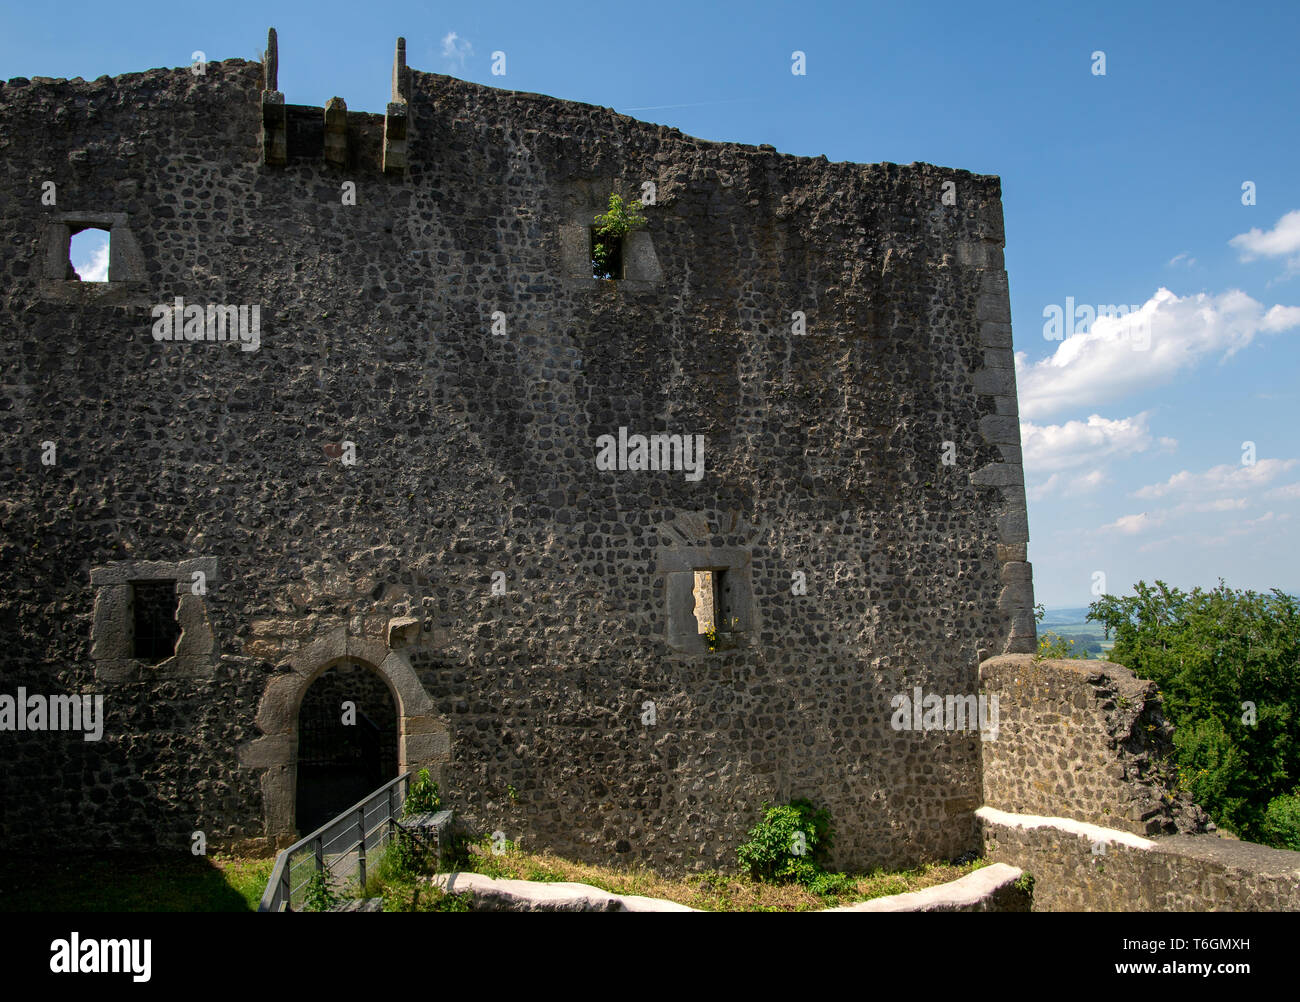 Old ruin of the castle Weidelsburg Stock Photo